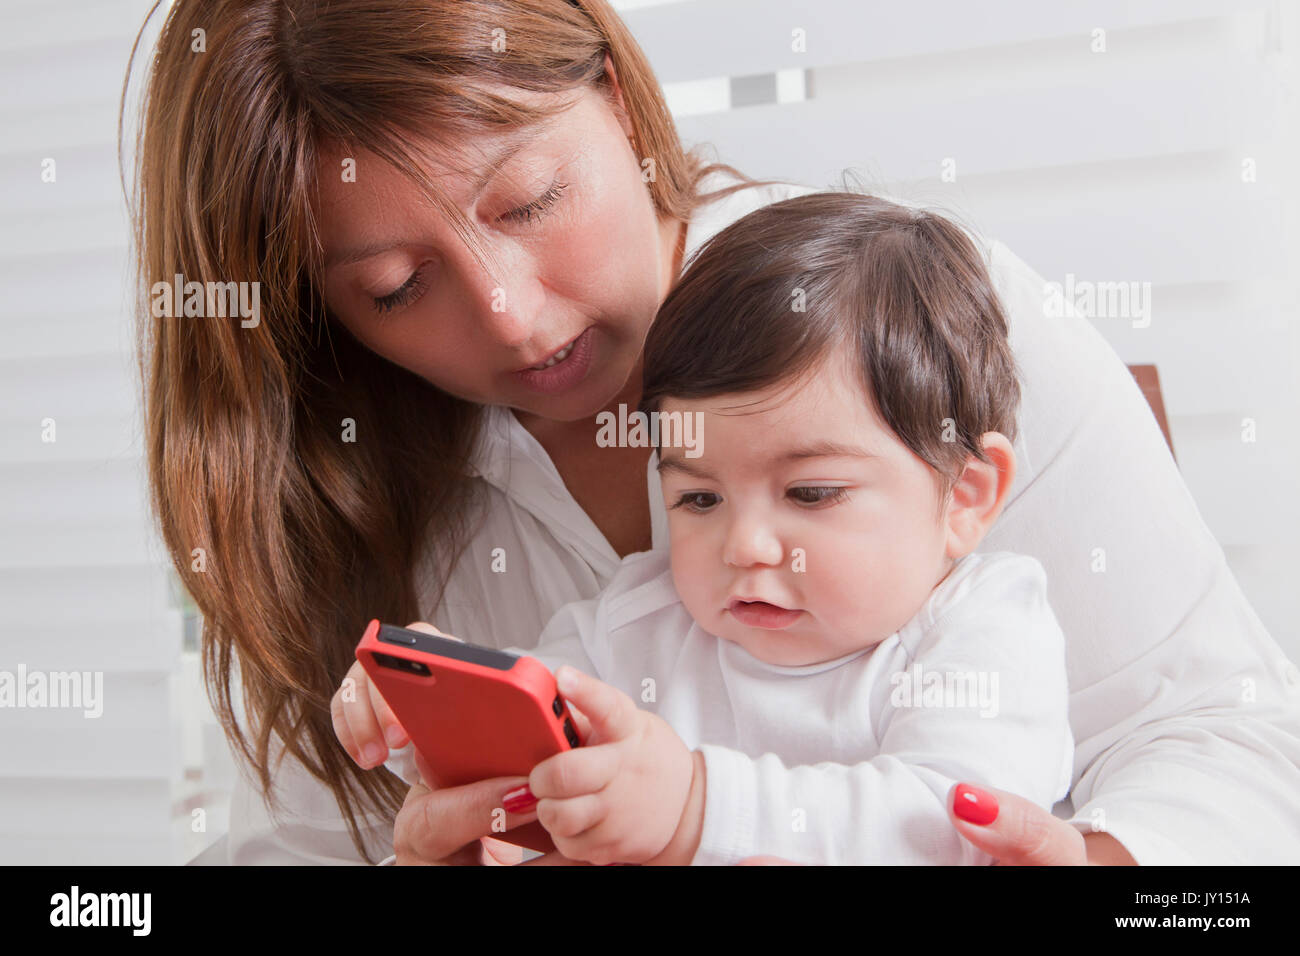 Hispanic mother holding baby boy playing with cell phone Banque D'Images